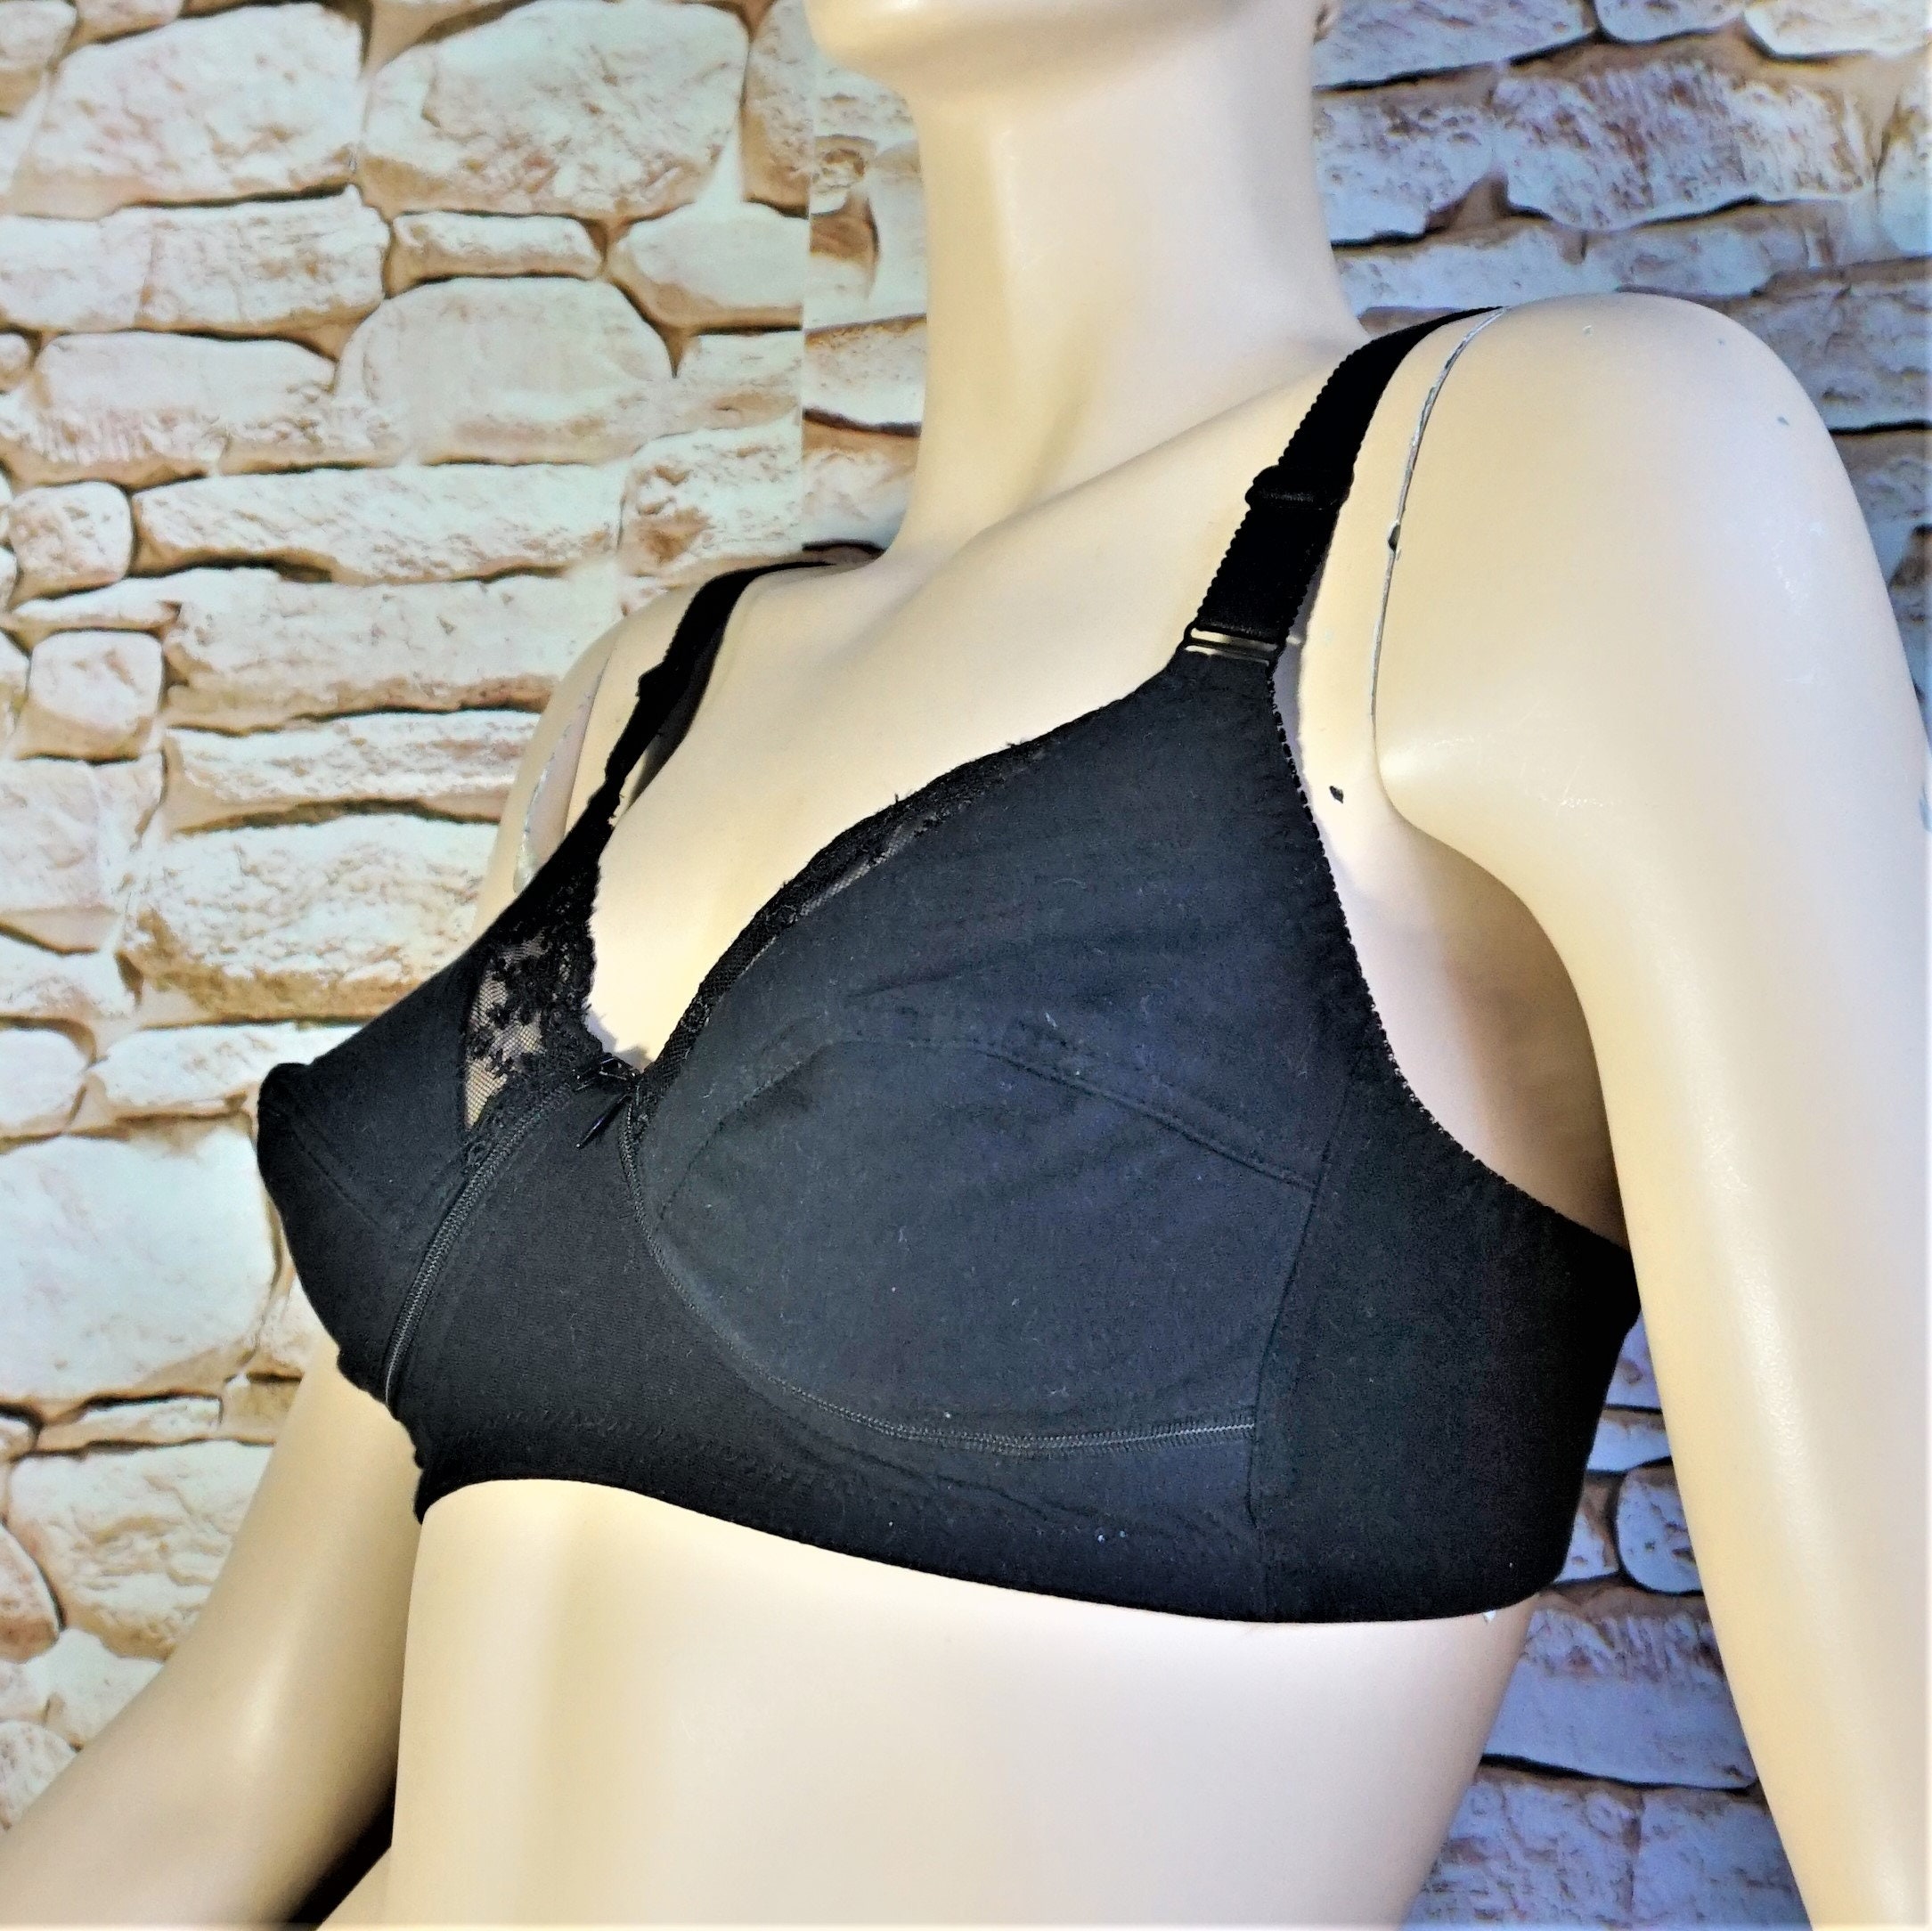 COTTON NURSING BRA, Super Comfortable European Feeding Bra With Zippers,  Made in Europe Lingerie, Stretch Cotton Bra, Gift for Her 